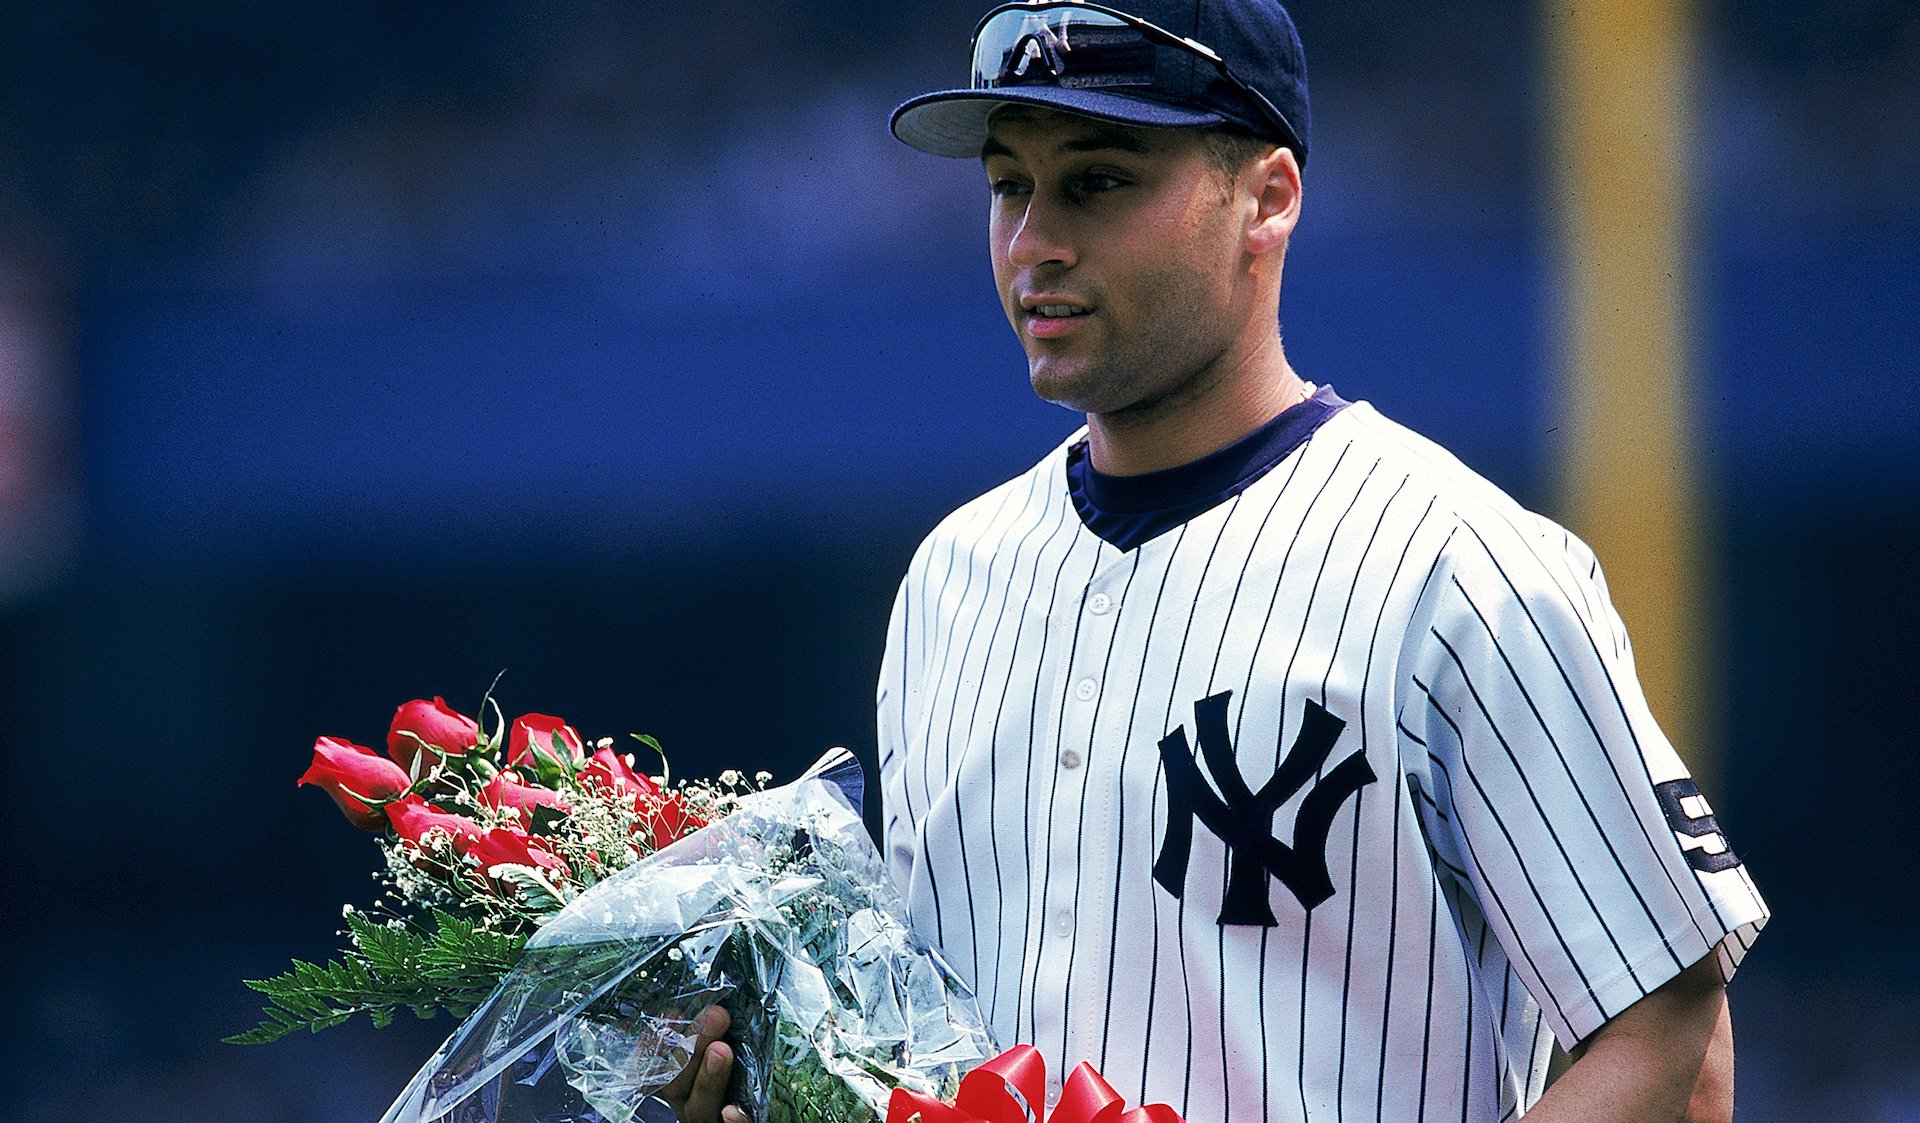 Derek Jeter's 8-Year-Old Signature Sold for an Obscene Amount of Money